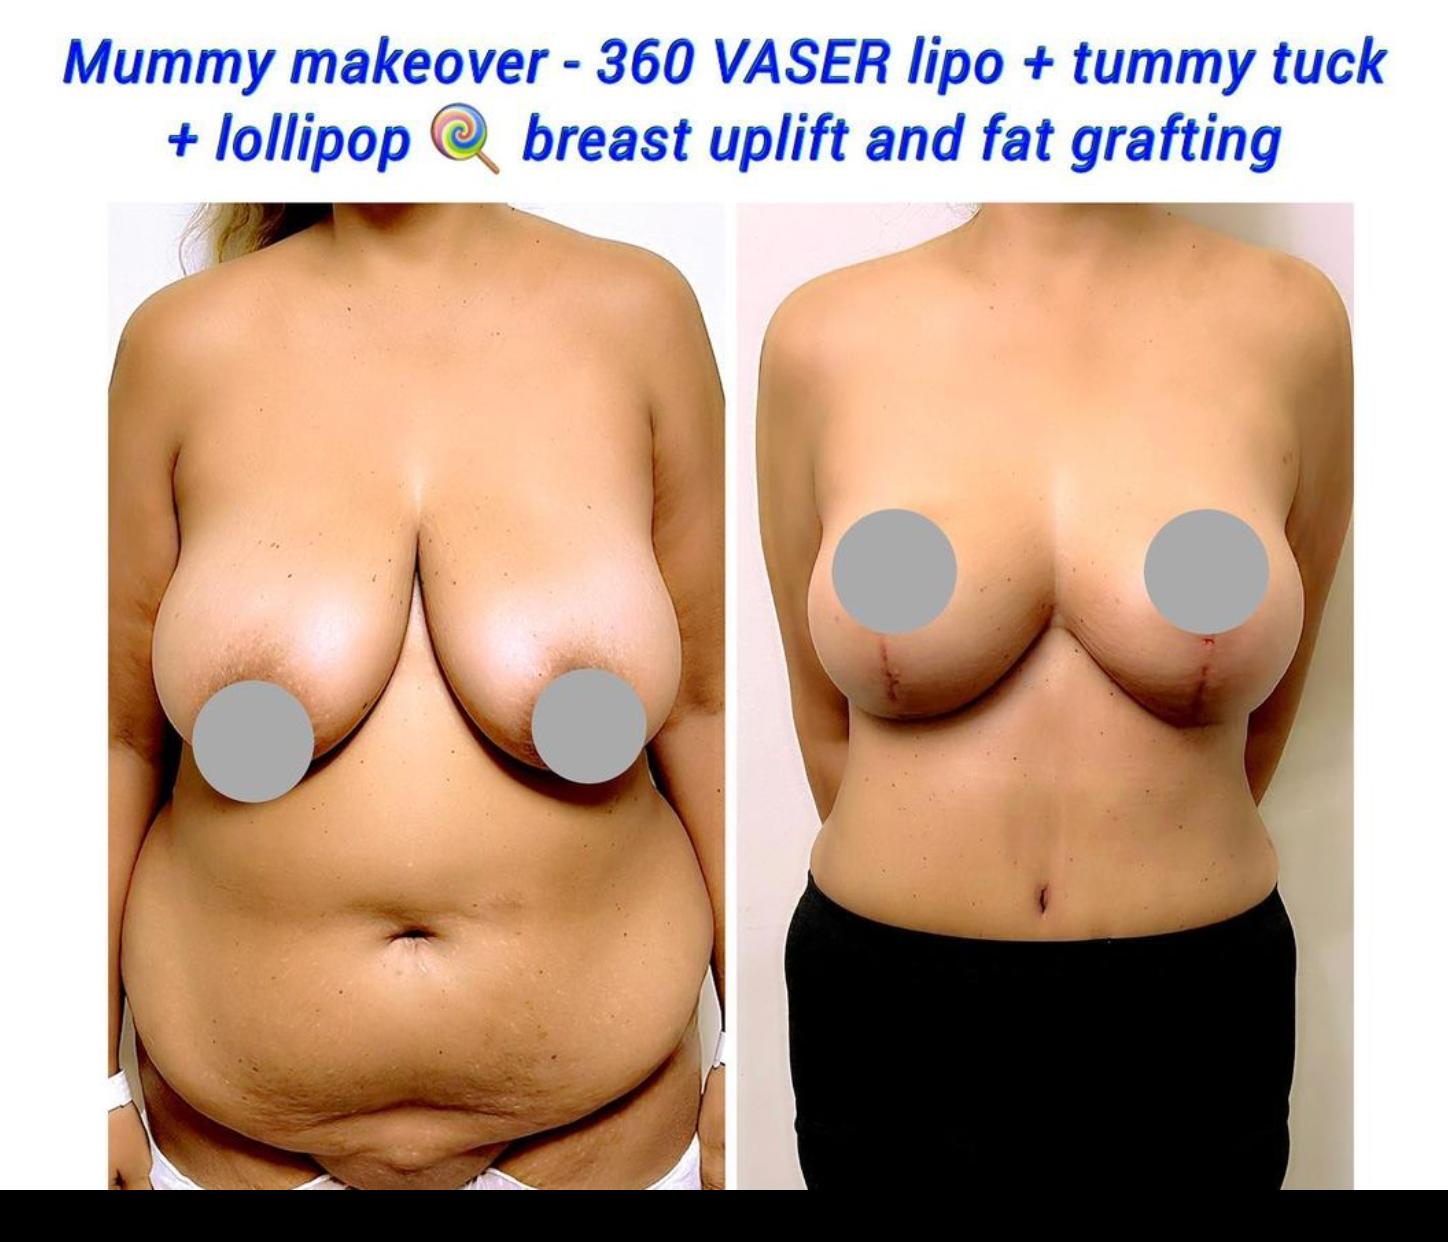 Mummy makeover in London, UK. Breast lift, tummy tuck and vaser liposuction.